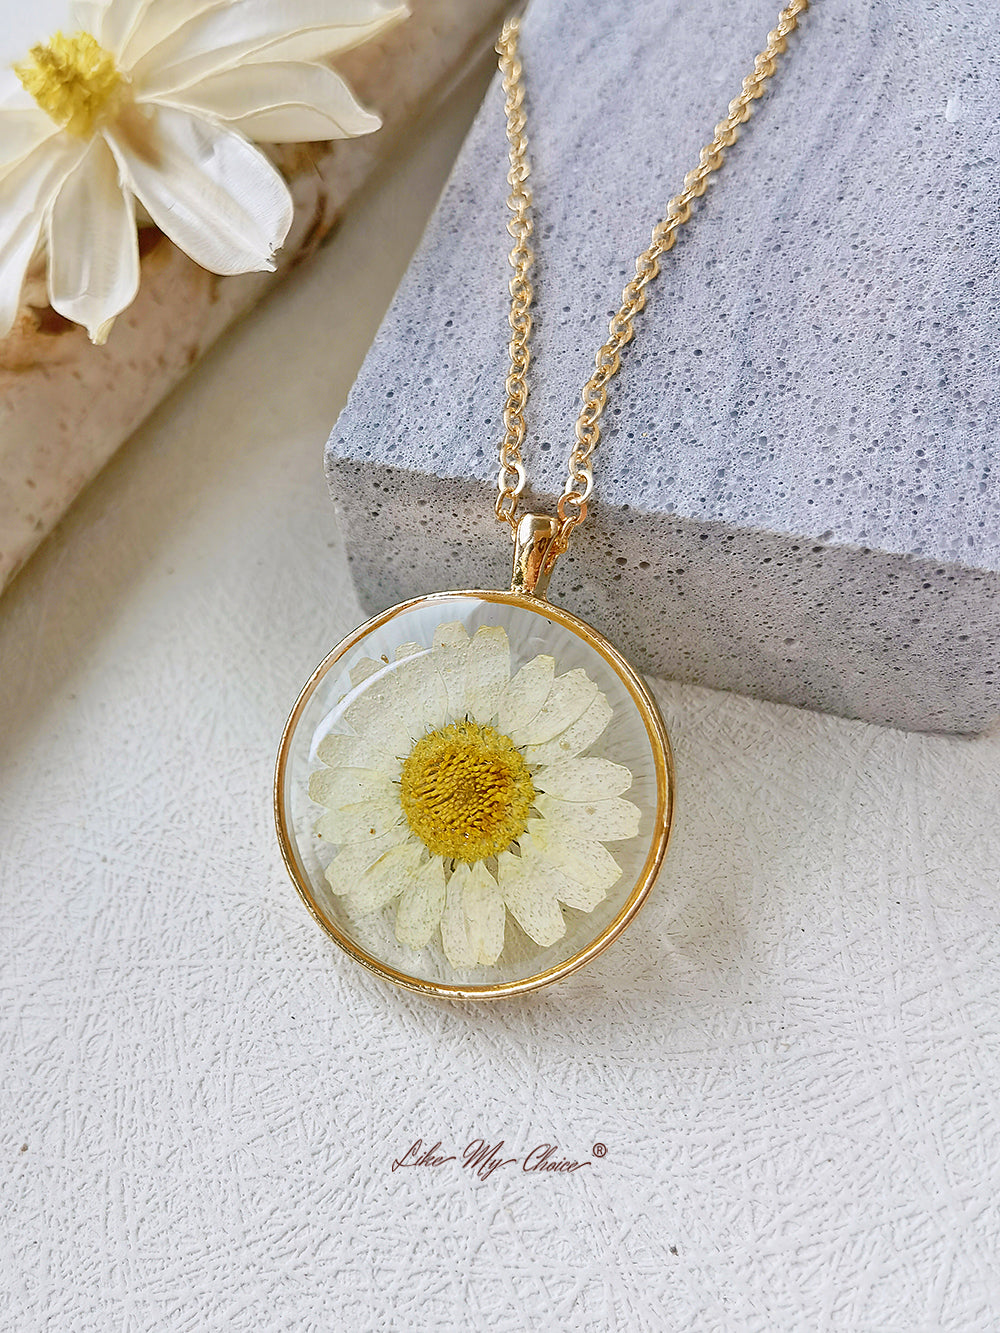 Natural Daisy Pressed Flower Necklace